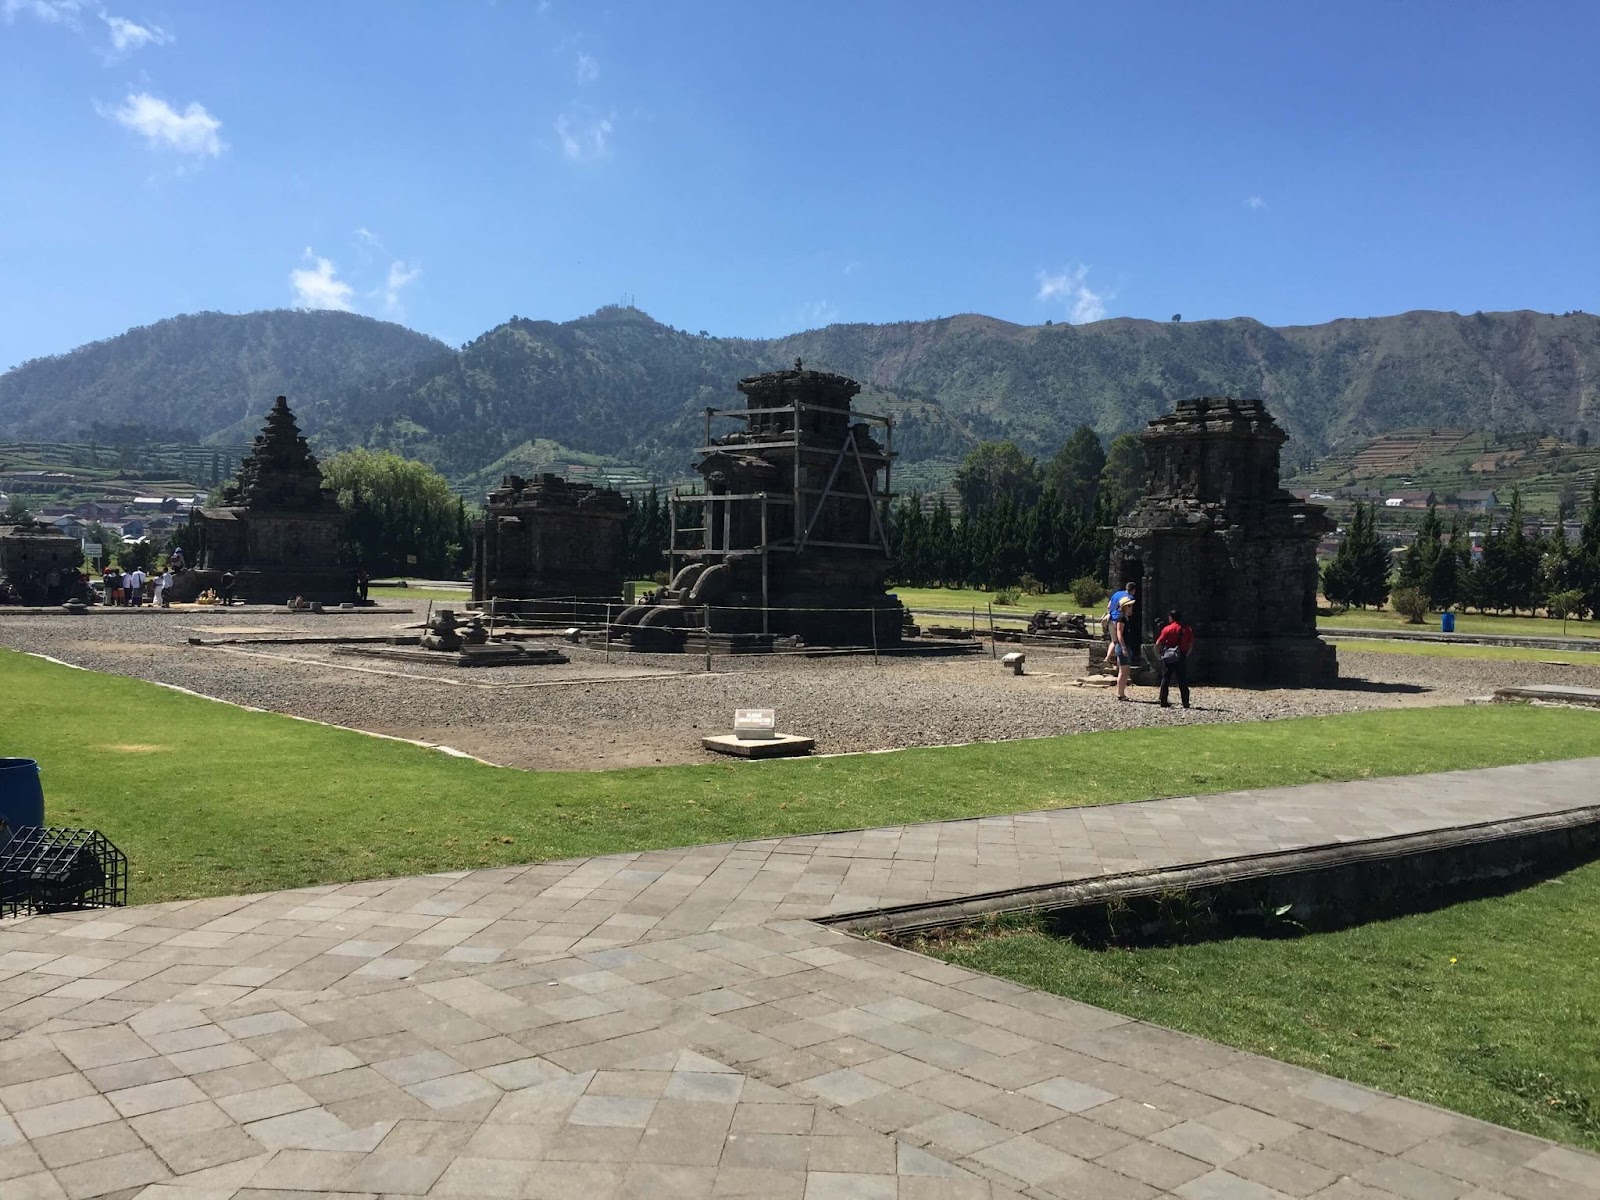 3 days in Yogyakarta, Dieng Plateau Arjuna Temple clusters, oldest surviving Hindu temples in Java built during the 8th or 9th century